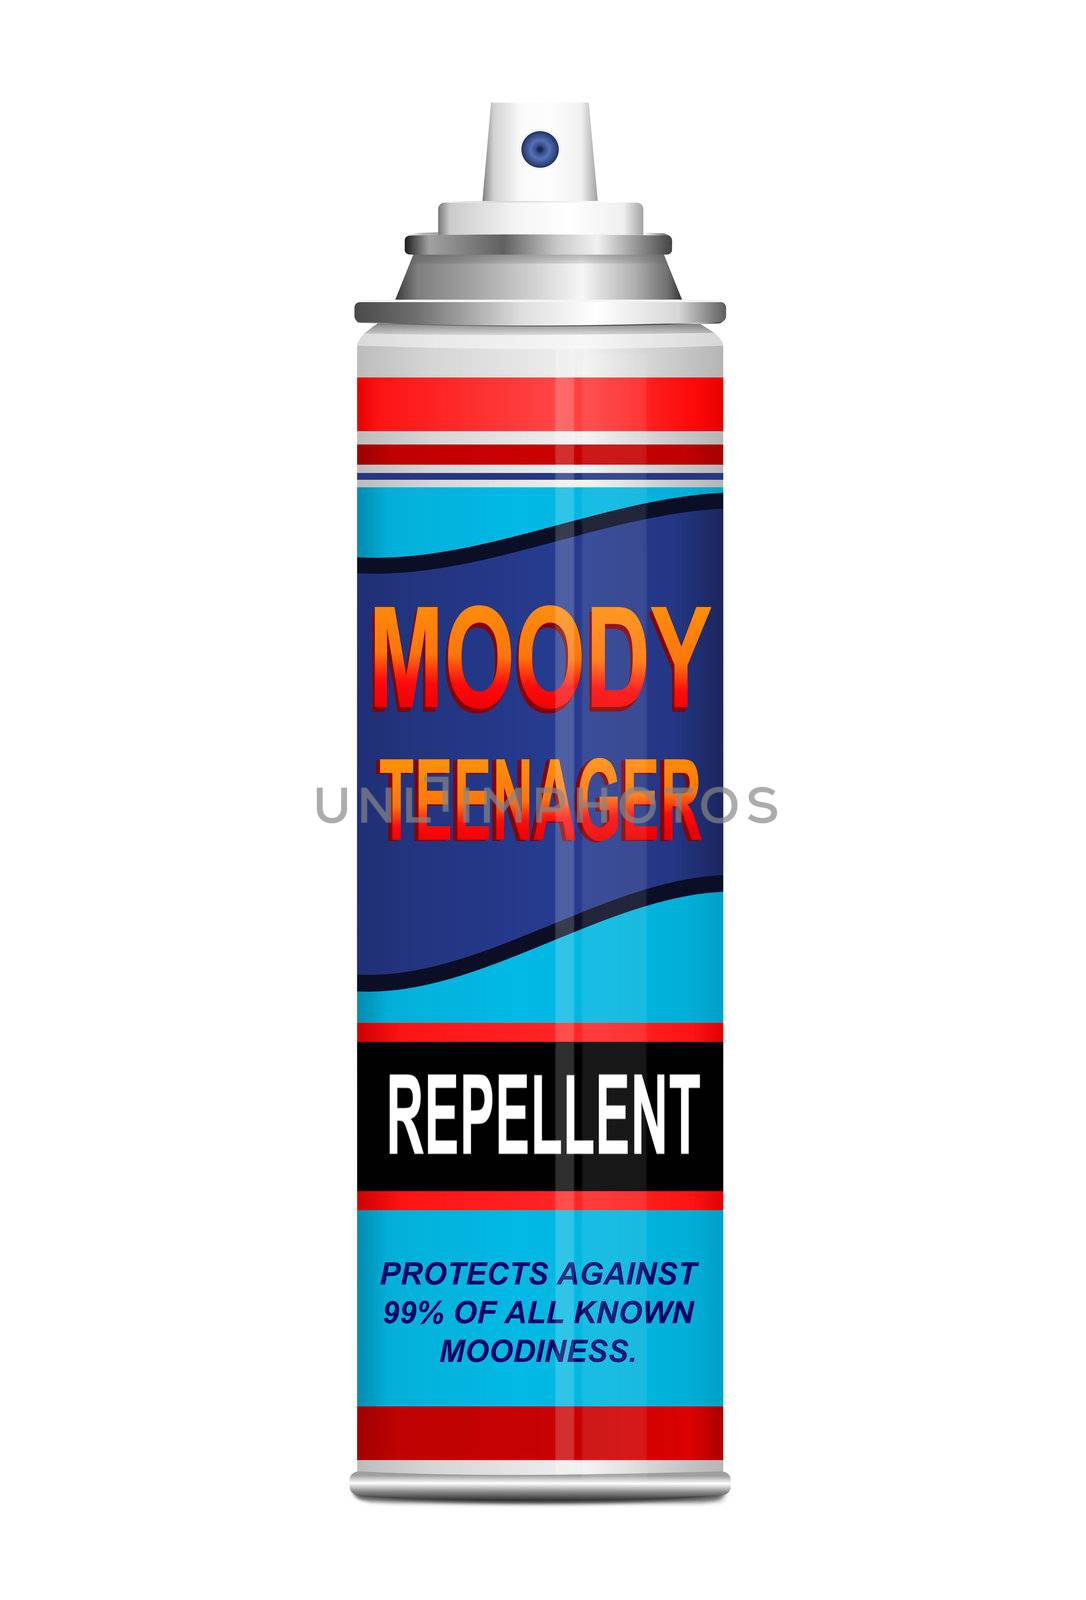 Teenage moodiness repellent. by 72soul